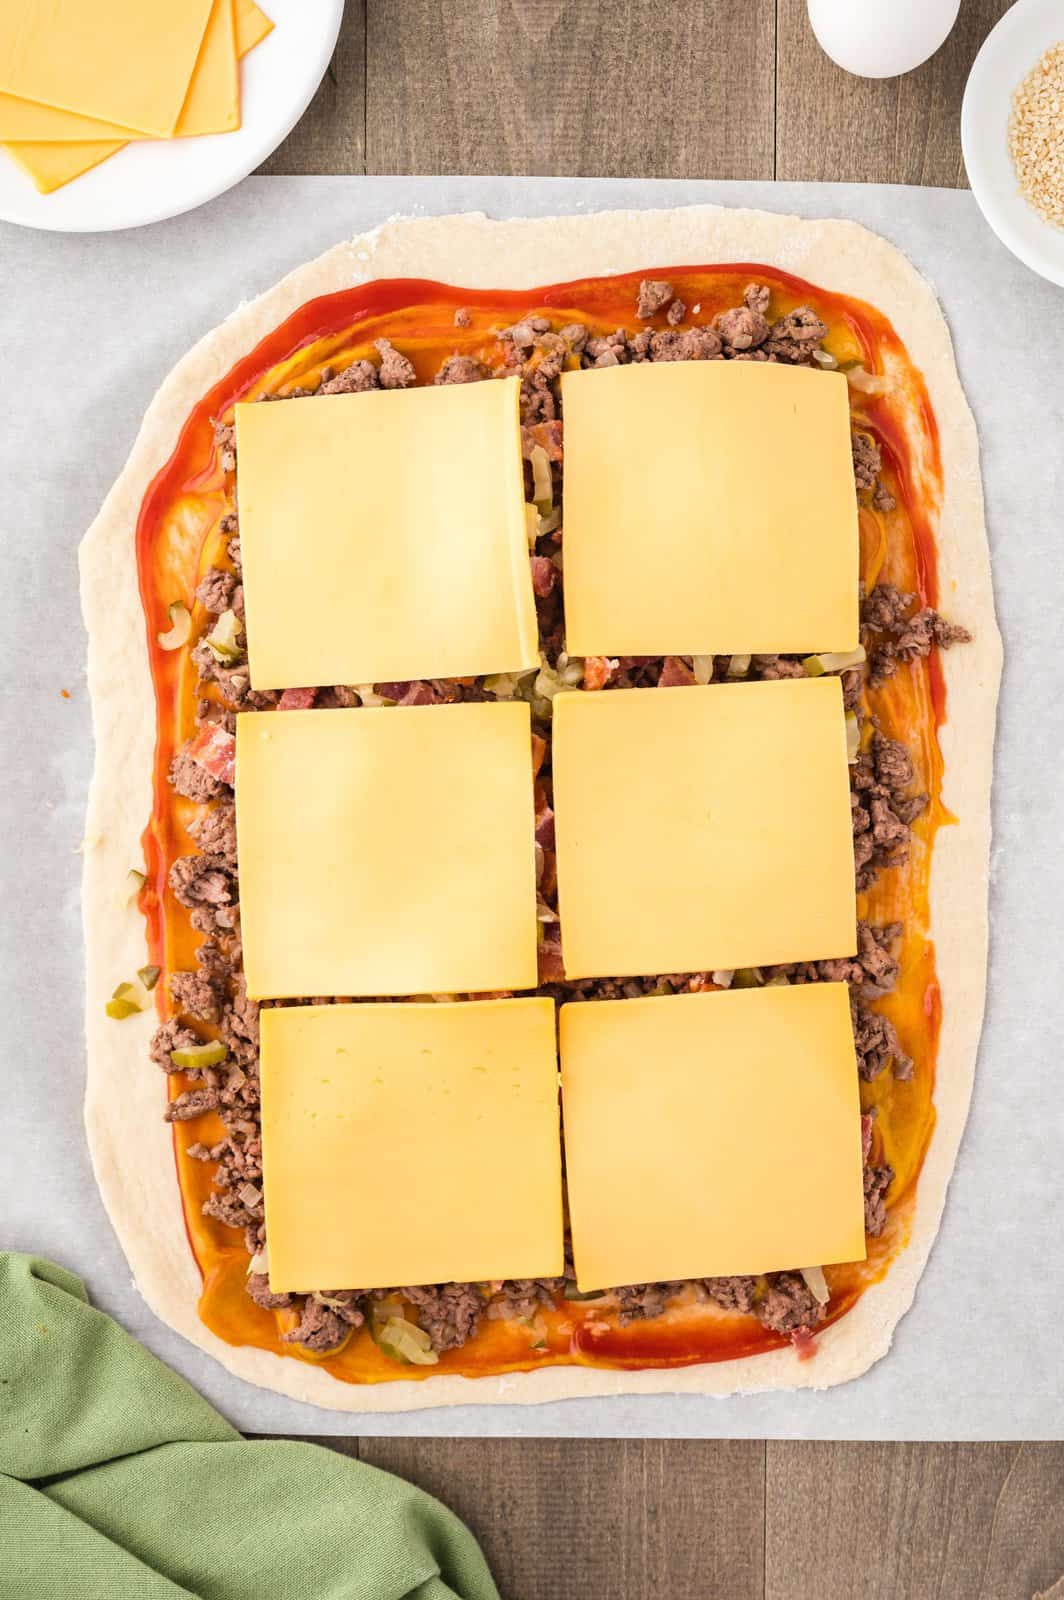 American cheese slices layered overtop of a ground beef mixture on bread dough.